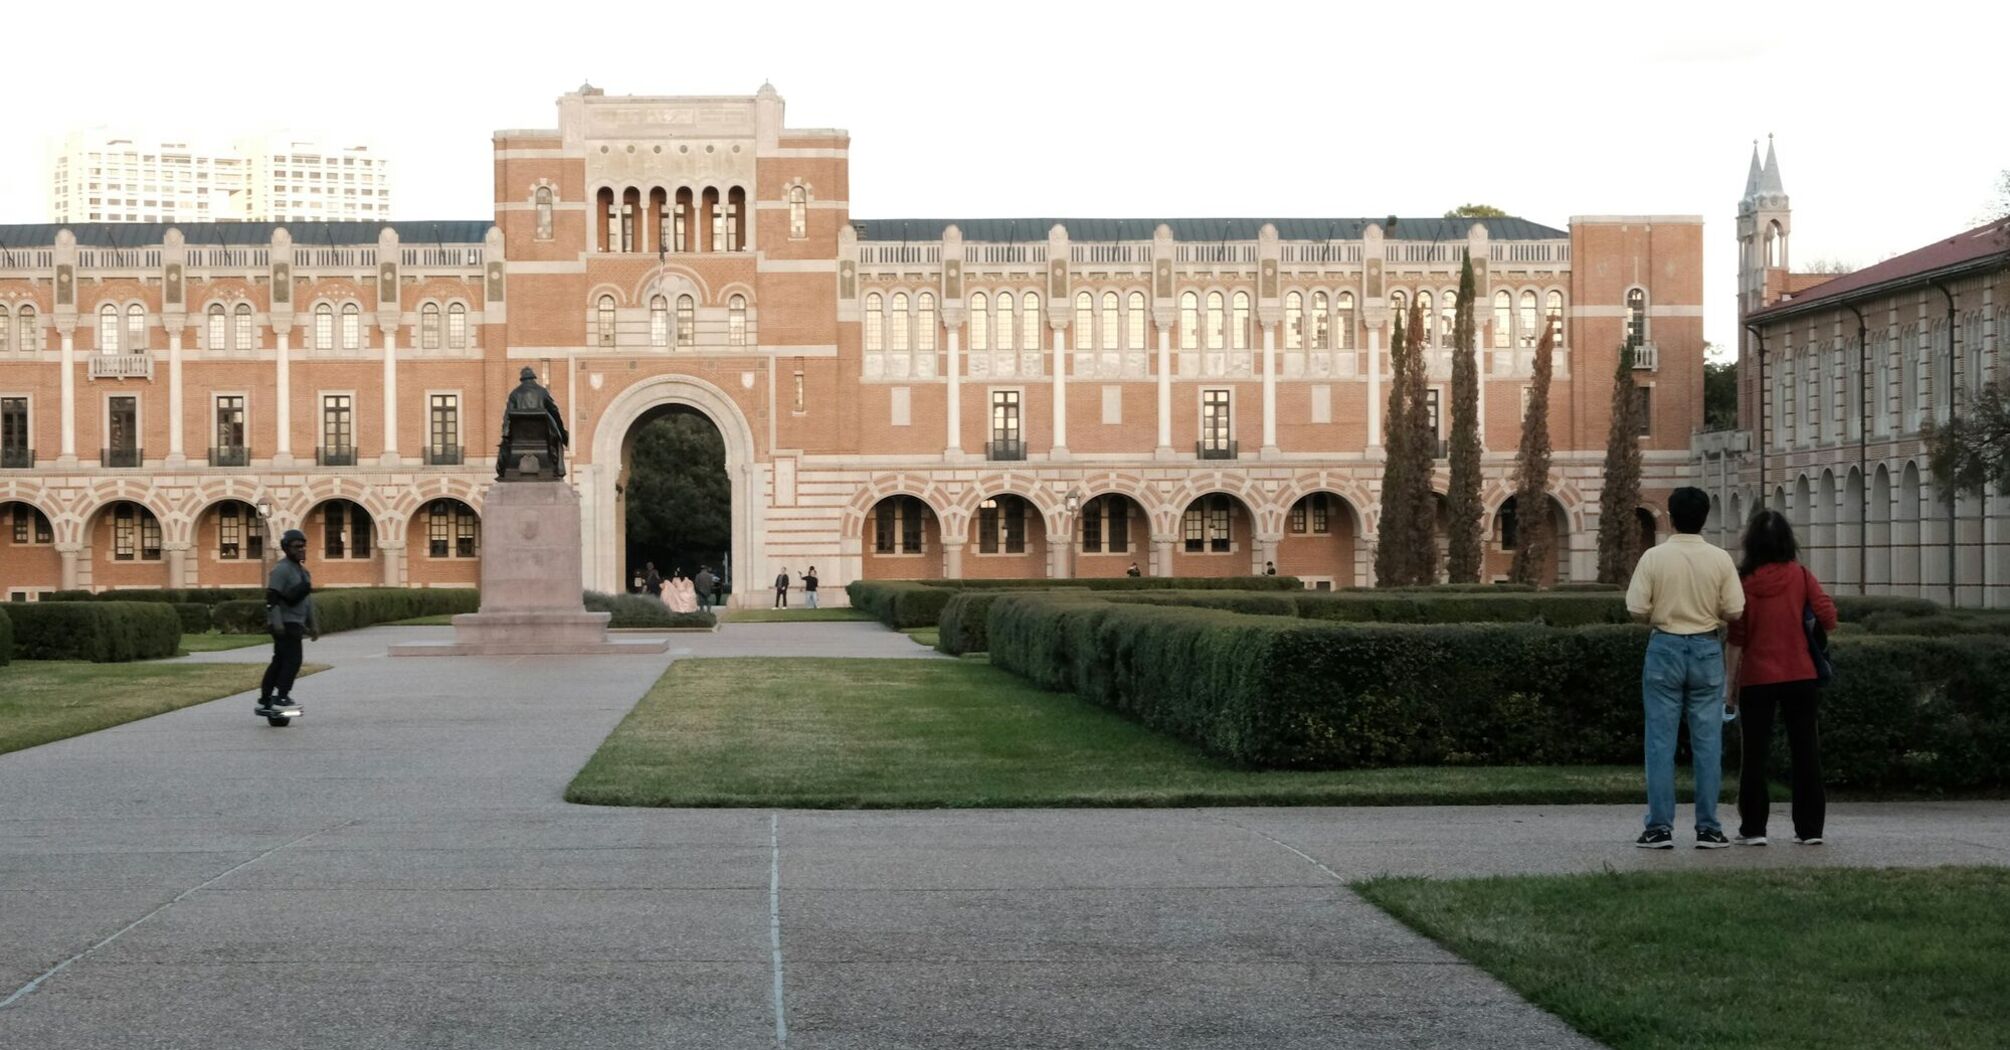 A view of Rice University's campus with people walking and a person on a skateboard